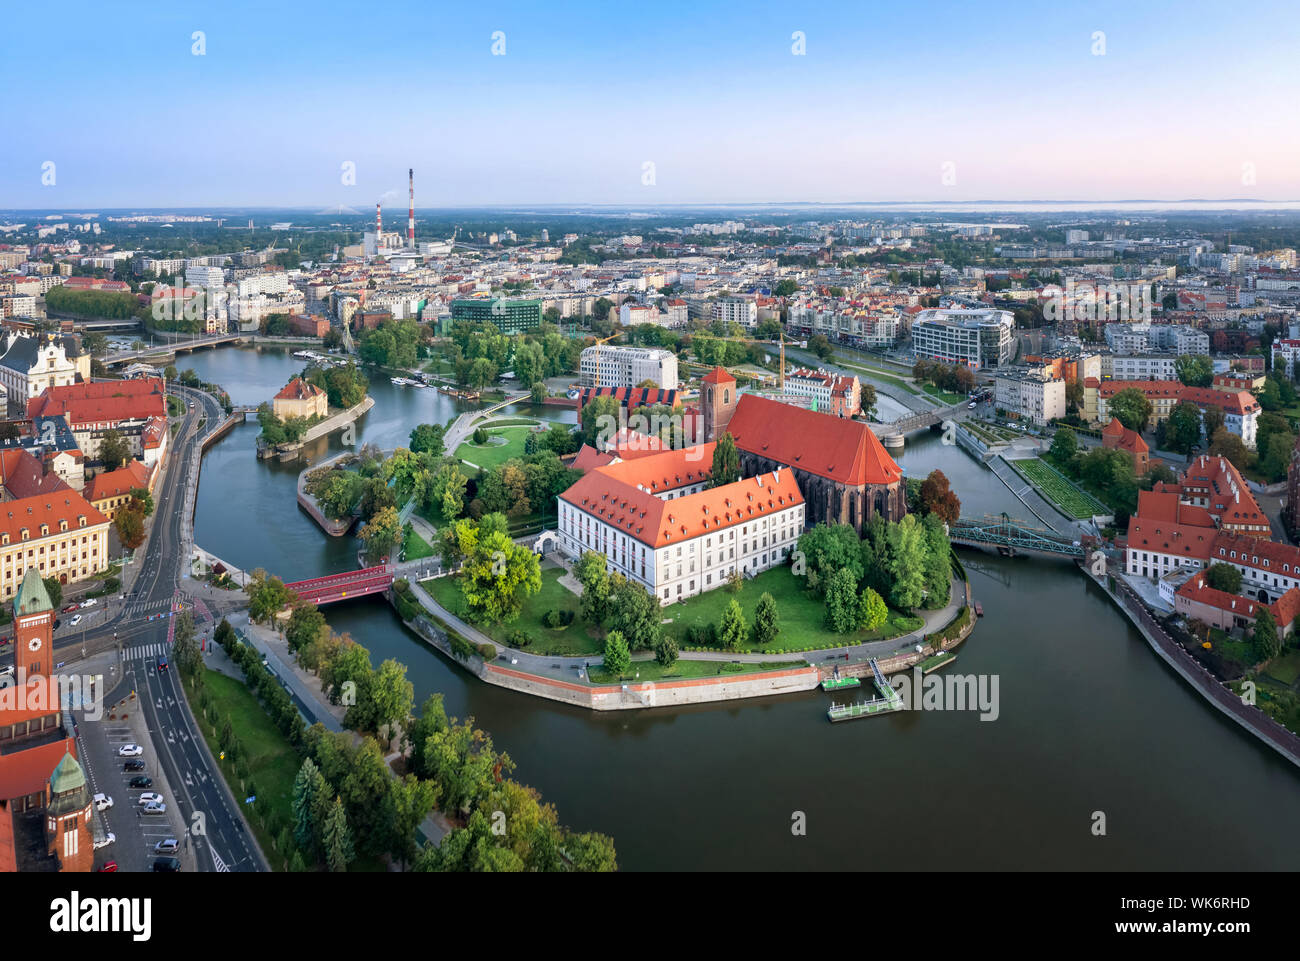 Aerial view of Wyspa Piasek (or Sand Island) in the Odra river, Wroclaw, Poland Stock Photo